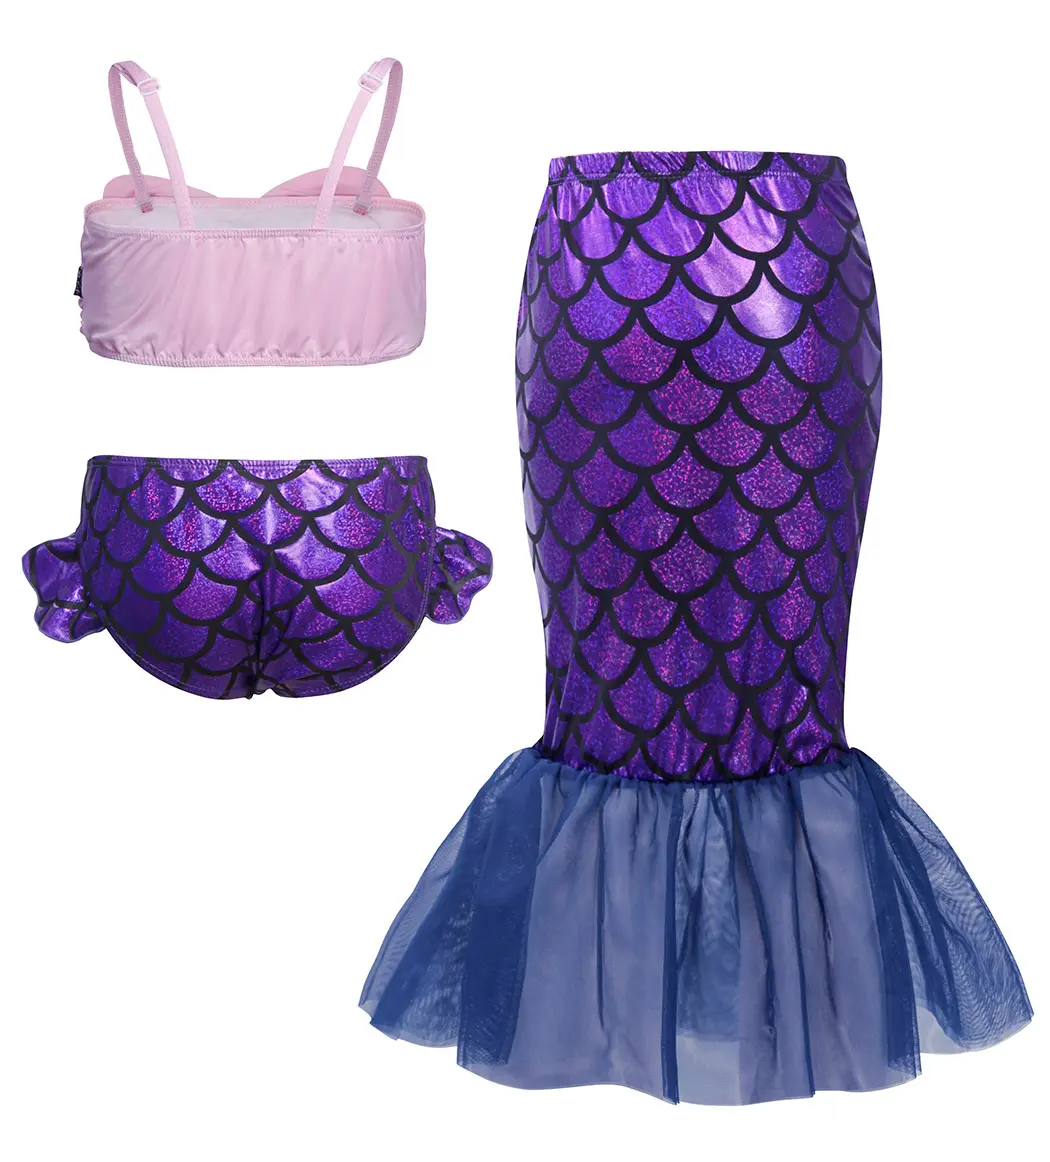 New 2021 Product Girl Swimwear Fashion Princess Mermaid Costume Mermaid Tails Bathing Suit Pool Party 3 Pieces Children